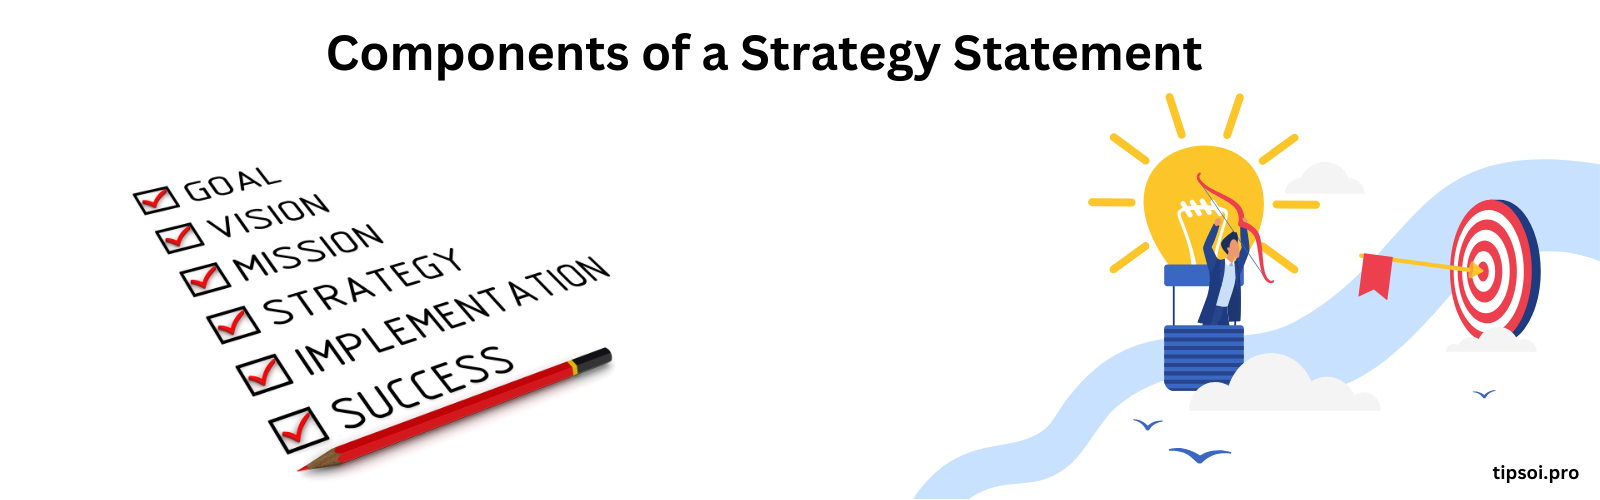 Components of a Strategy Statement